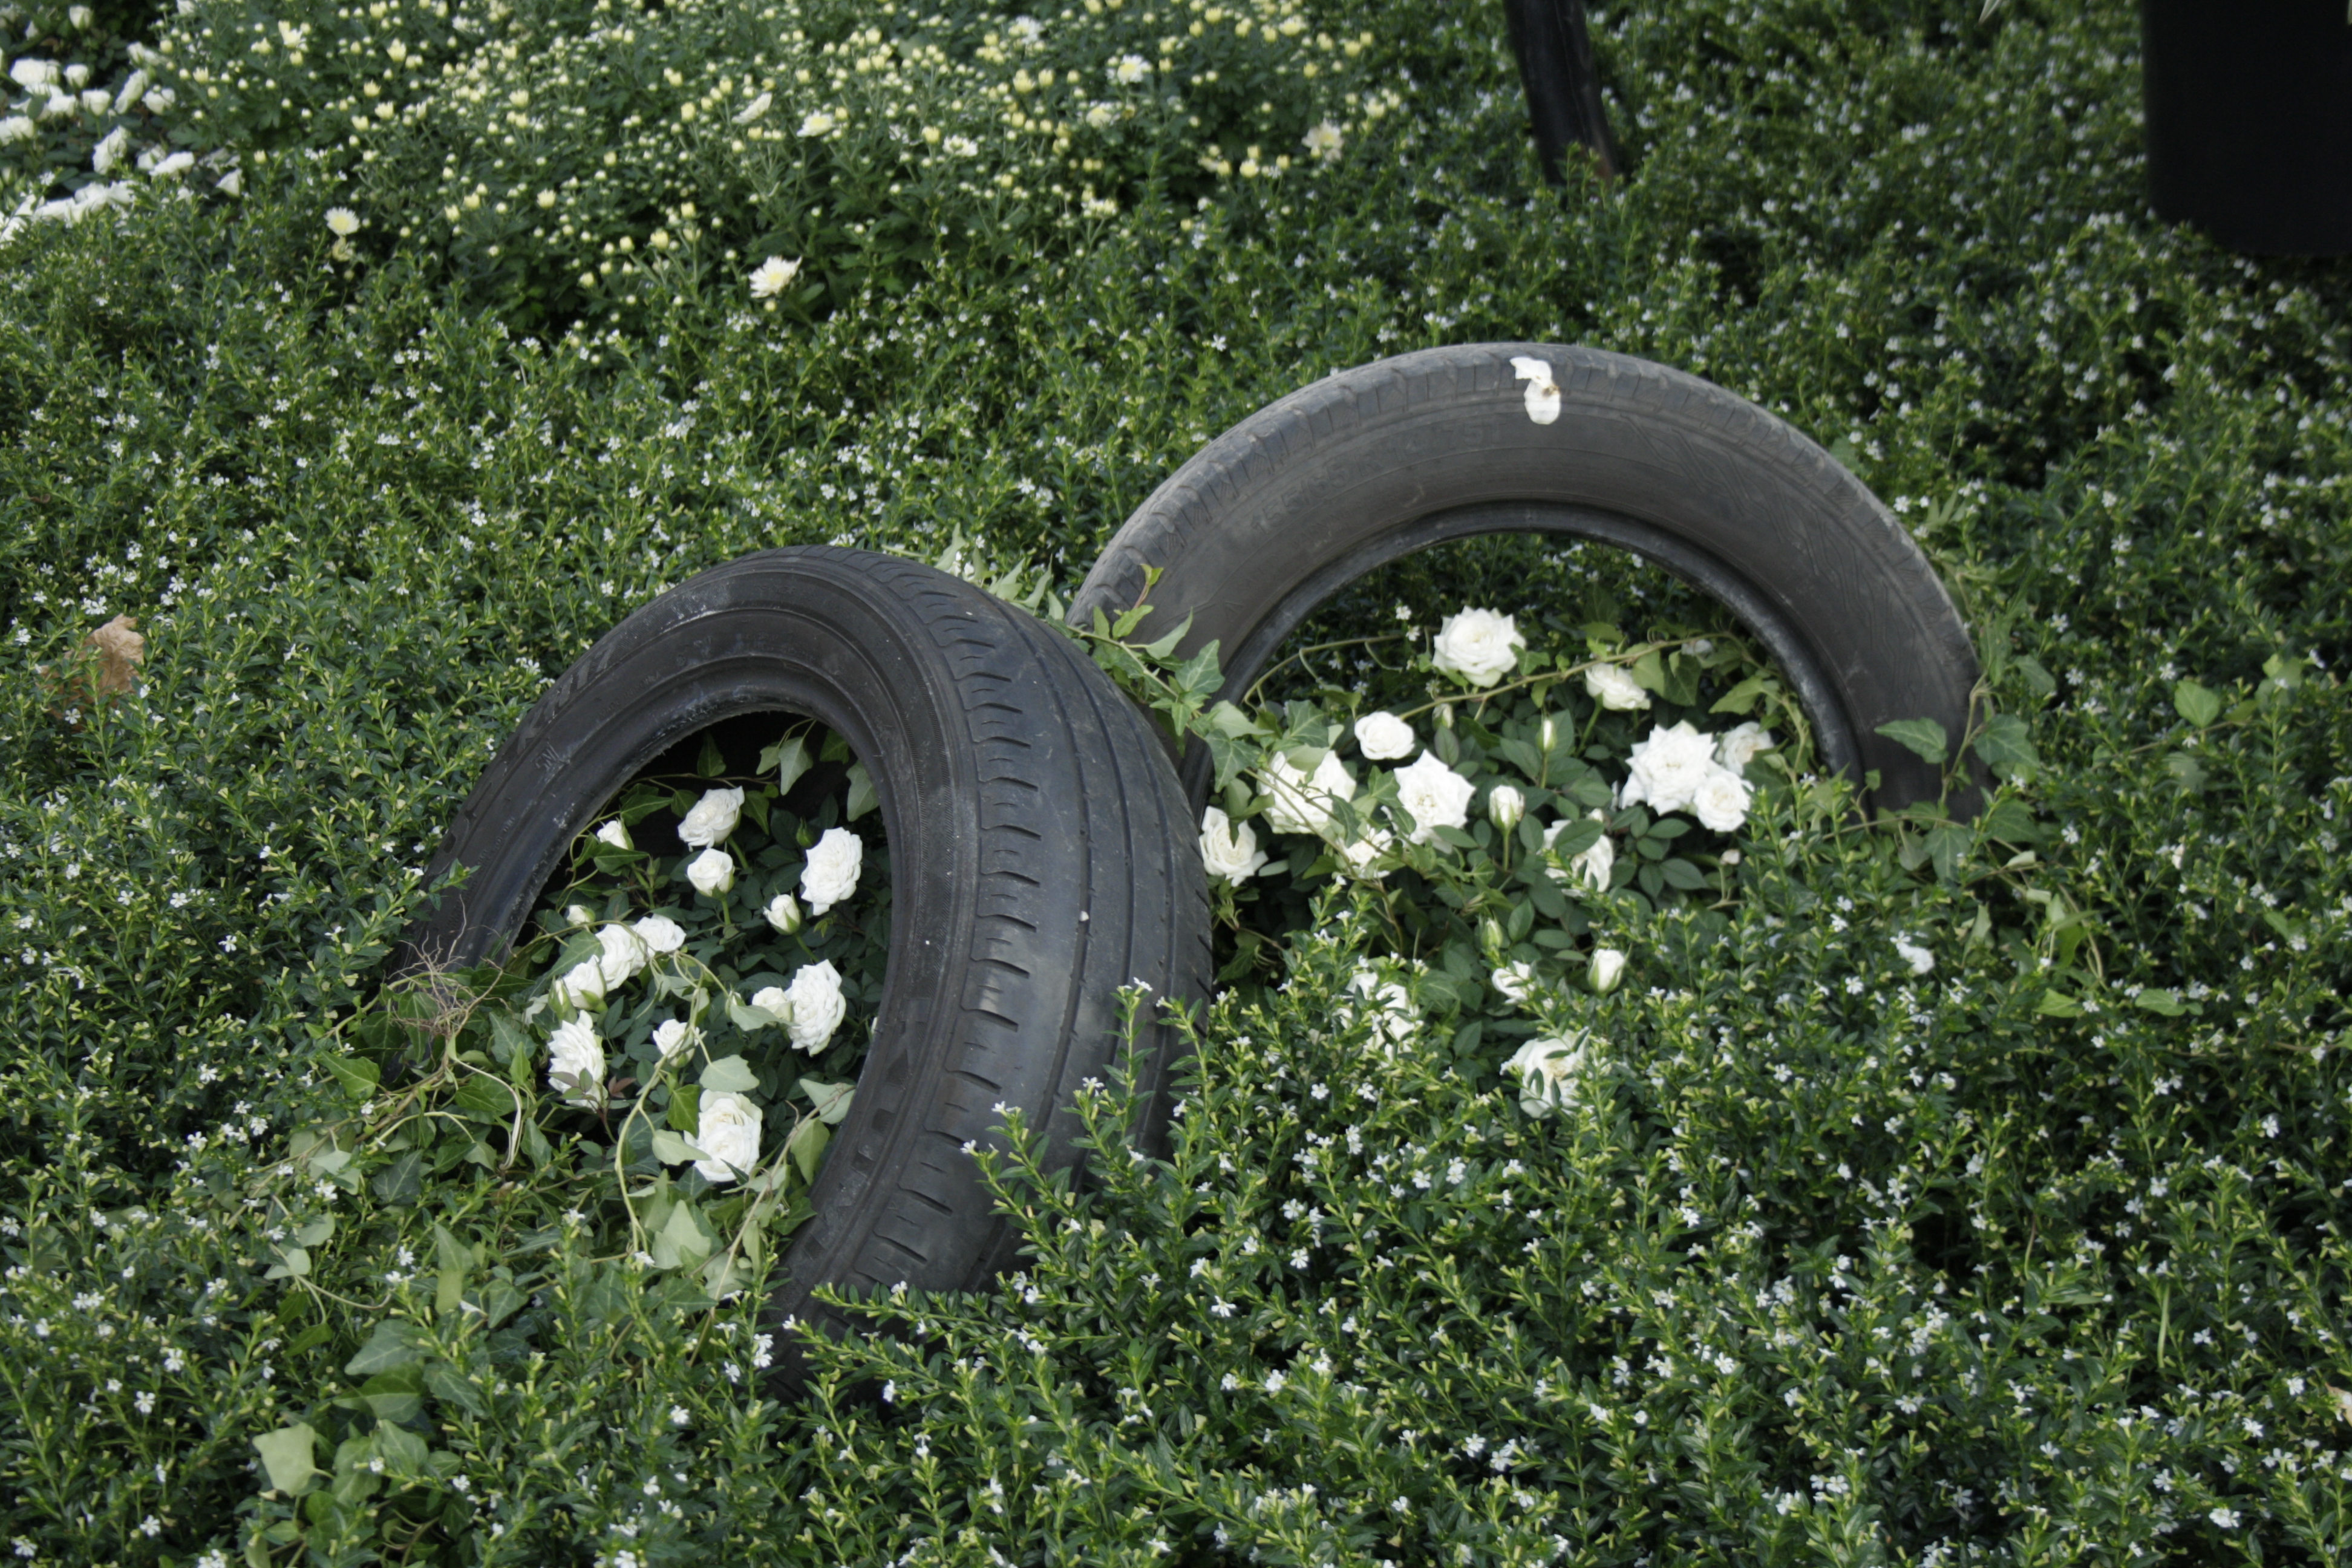 Flowers Spring Tire Tires 3888x2592